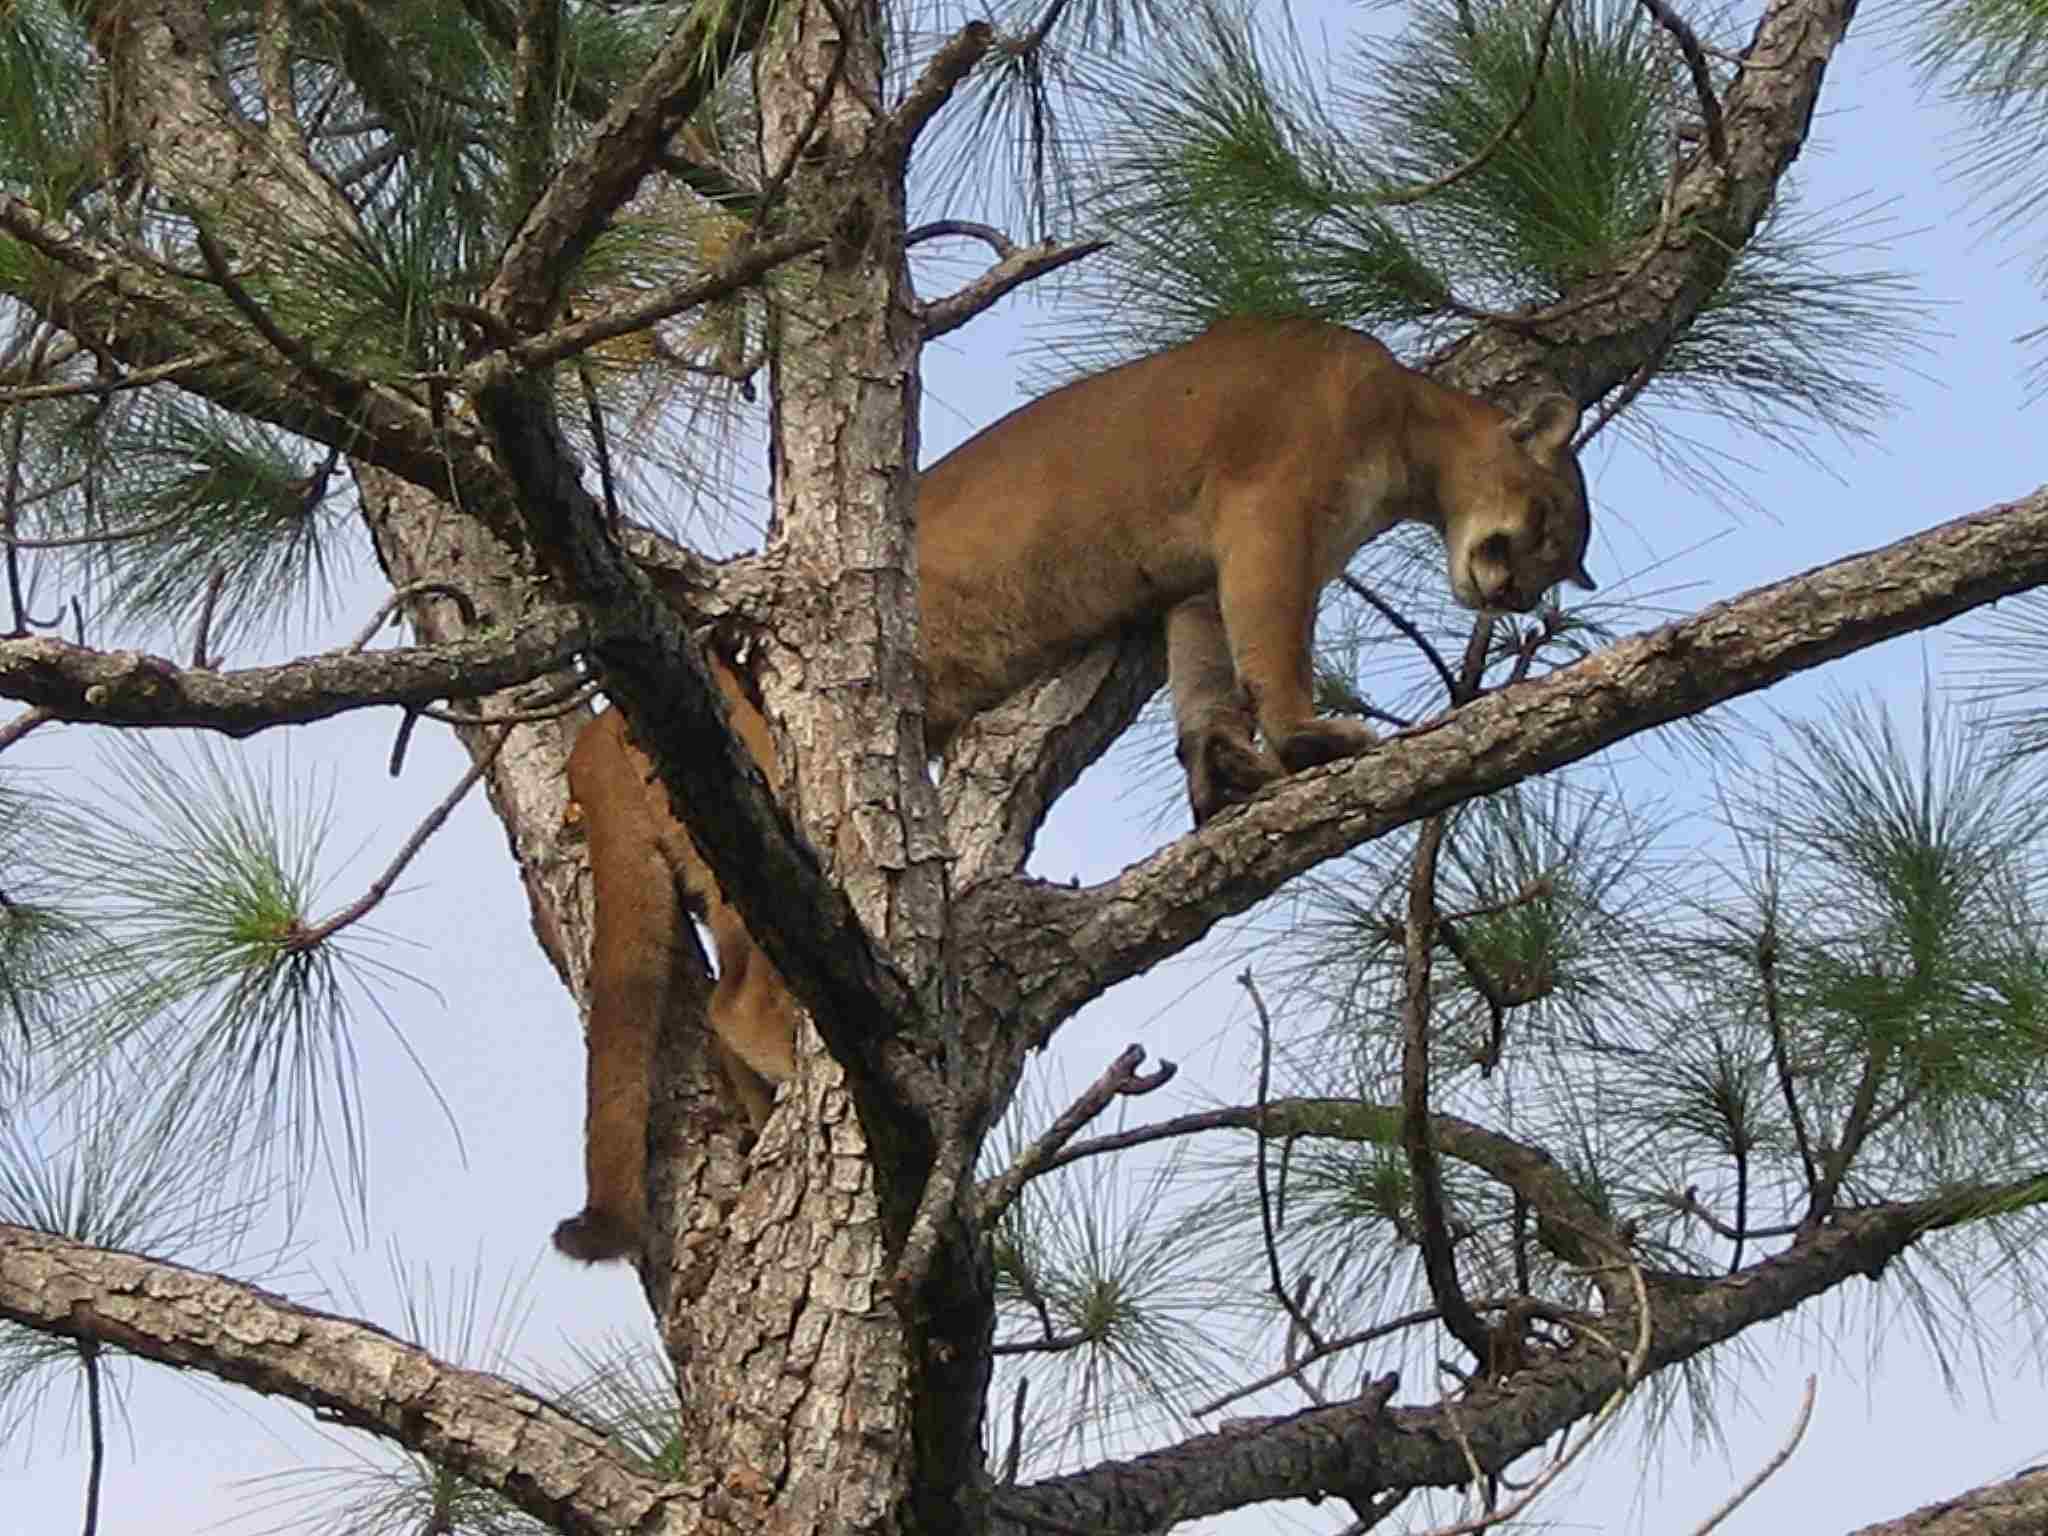 What Eats Eagles: Cougars are Potential Eagle-Predators by Reason of Their Agility (Credit: U.S. Fish and Wildlife Service Southeast Region 2007, Uploaded Online 2010 .CC BY 2.0.)